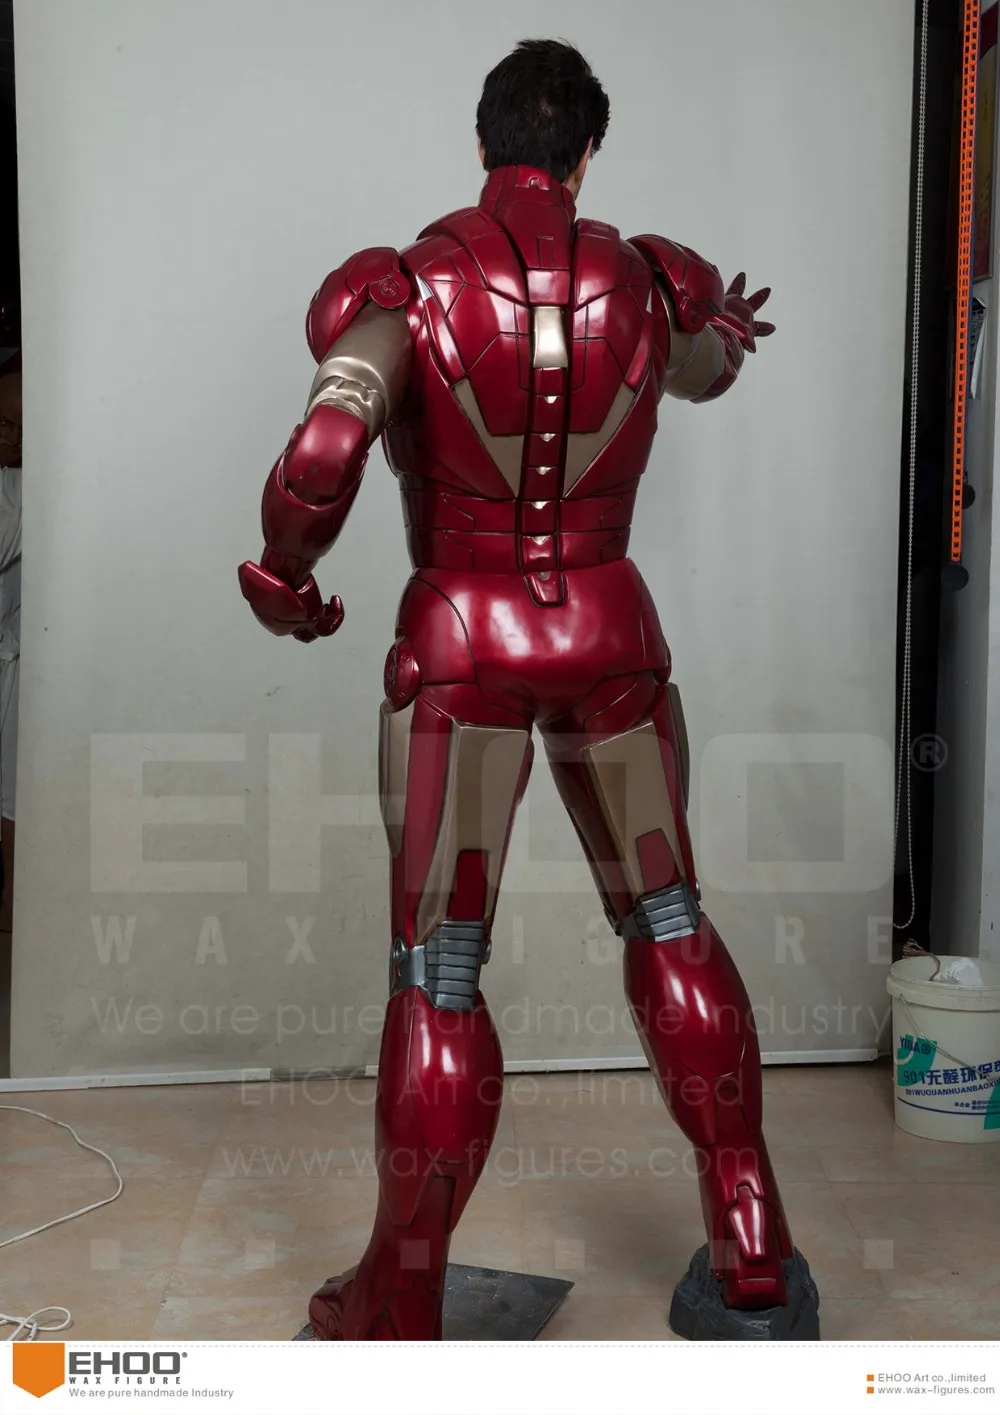 Resin Life Size Statue Of World Famous Movie Character Wax Statues Buy Silicone Wax Statues Of Sales Lifelike Ironman Wax Statues Iron Man Wax Figure Product On Alibaba Com